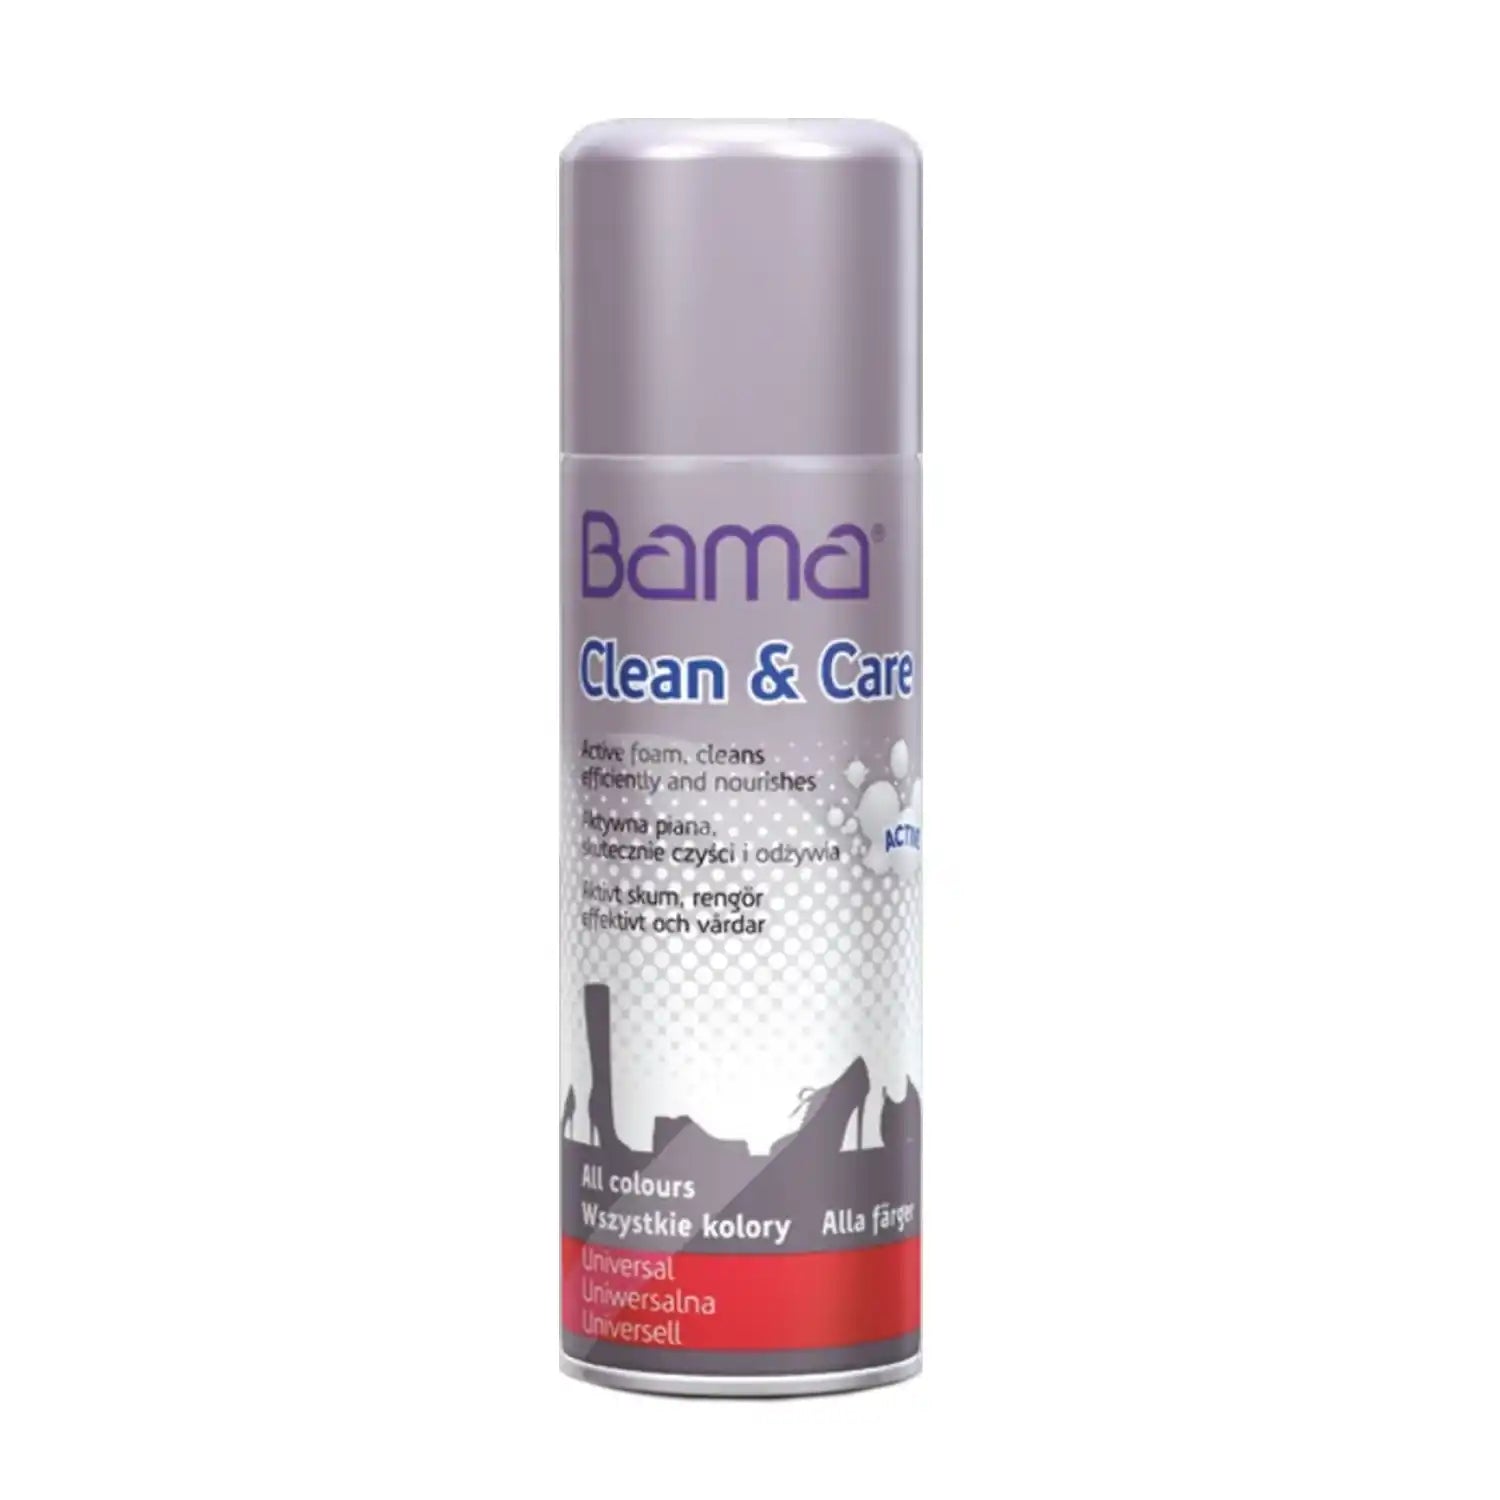 Bama Clean And Care Foam 1 Shaws Department Stores